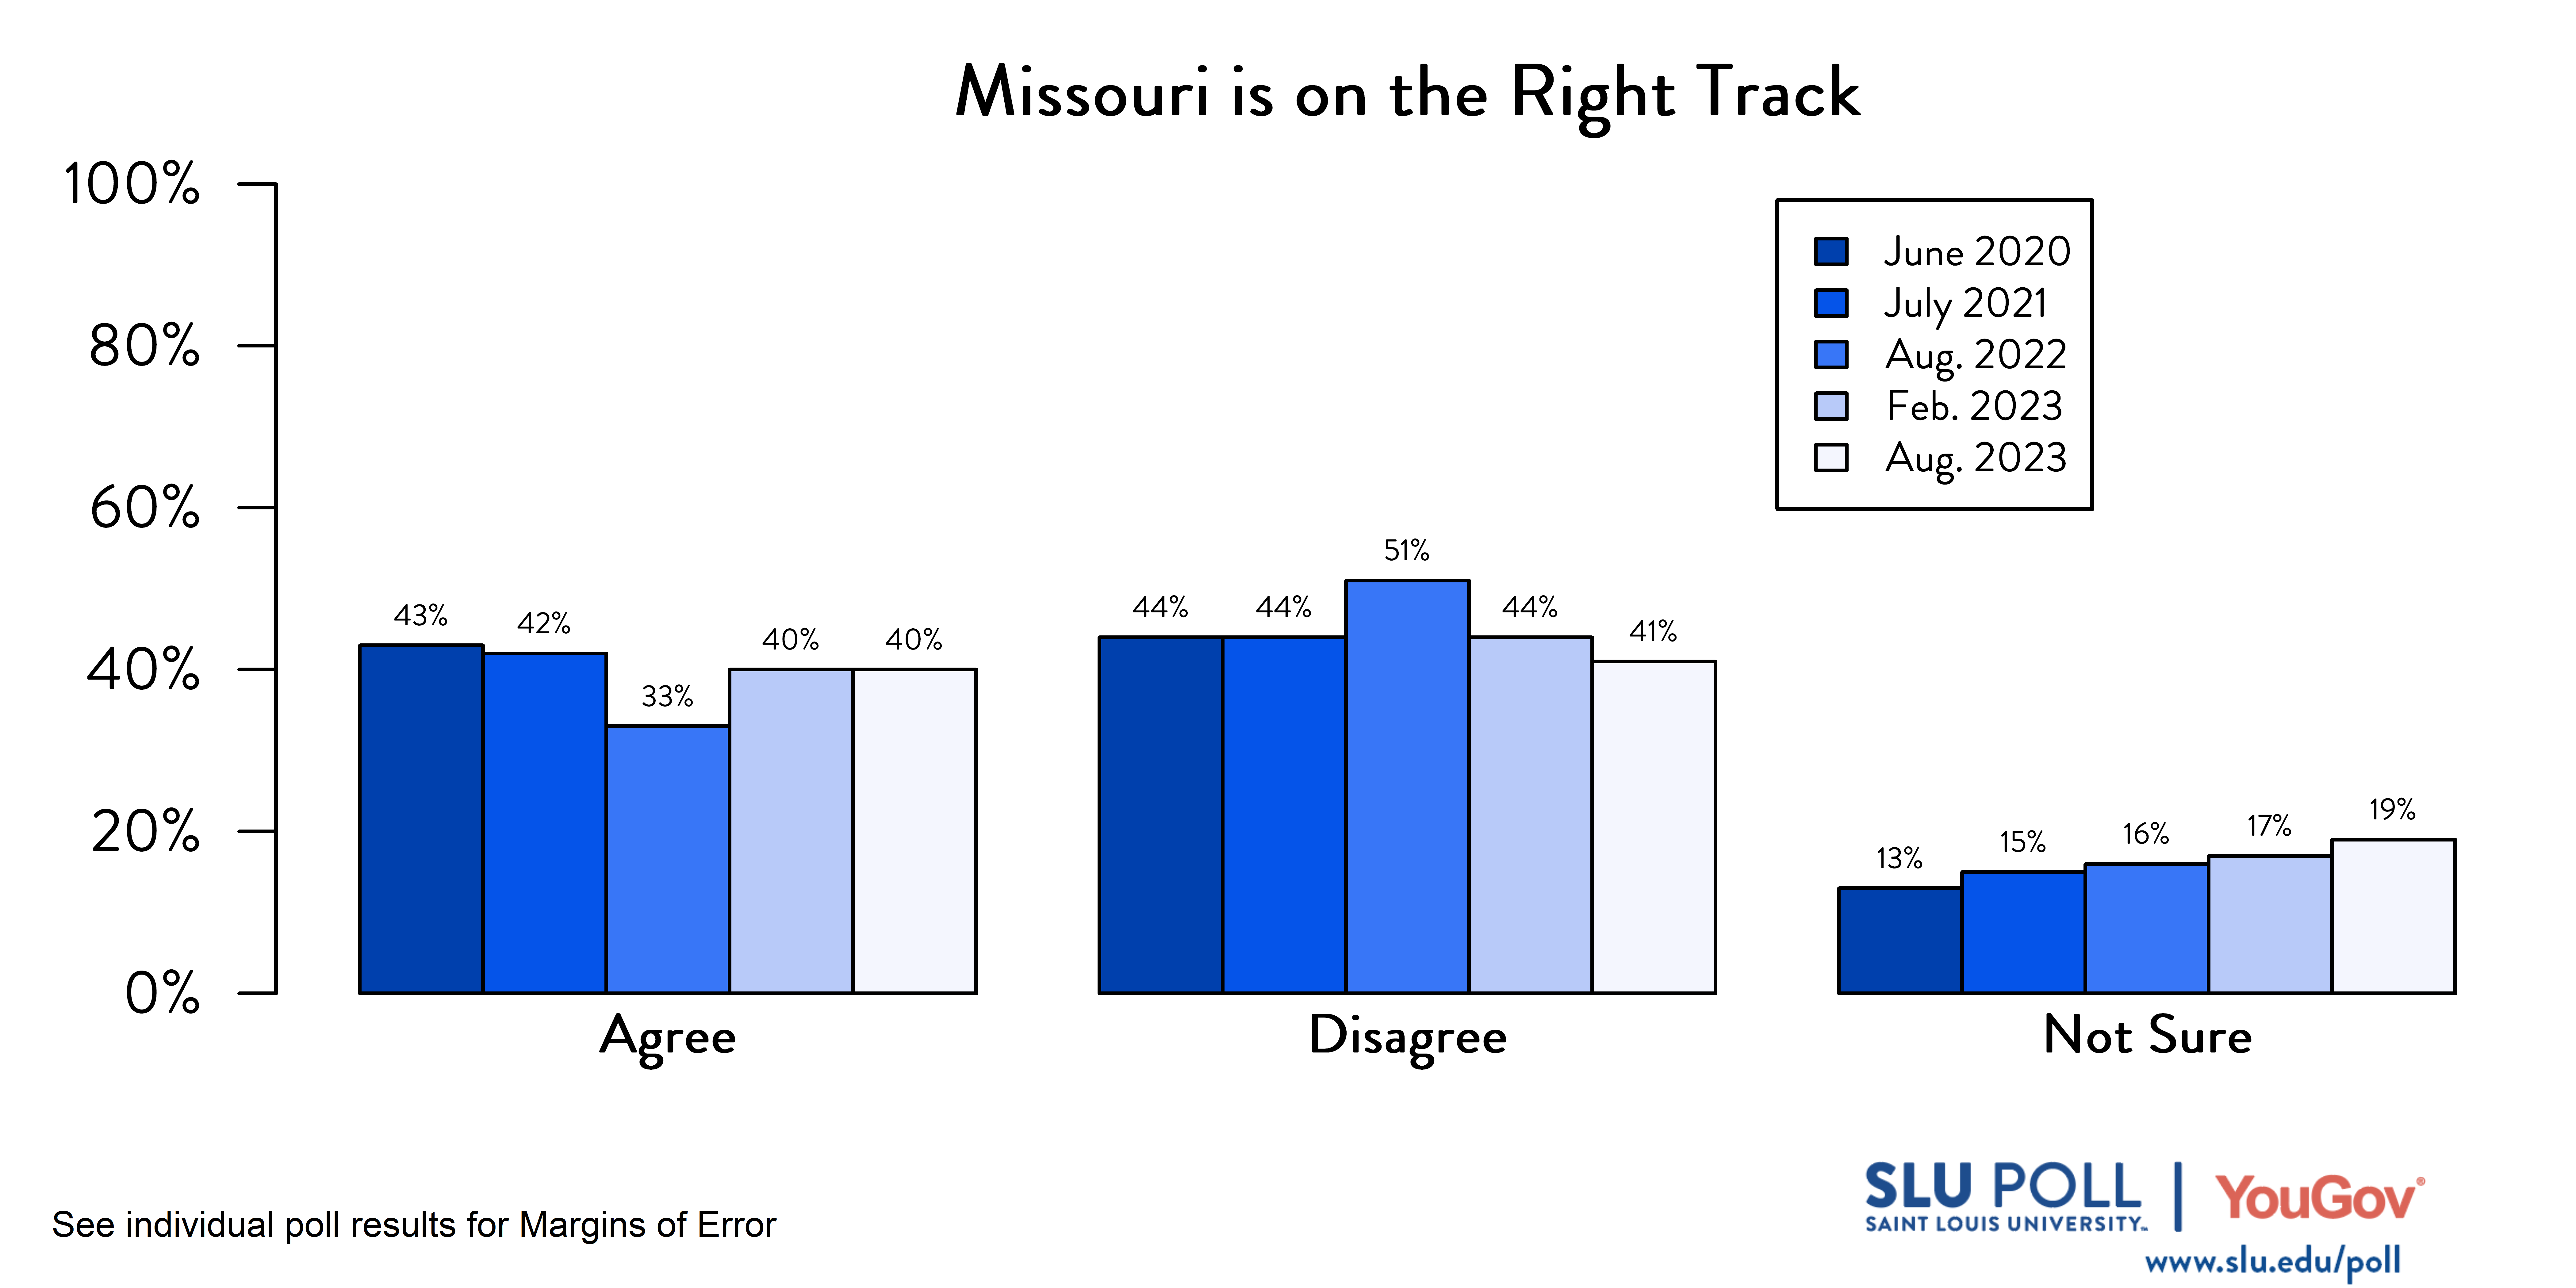 Likely voters' responses to 'Do you agree or disagree with the following statements: The State of Missouri is on the right track and headed in a good direction?'. October 2020 Voter Responses: 43% Agree, 44% Disagree, and 13% Not Sure. July 2021 Voter Responses: 42% Agree, 44% Disagree, and 15% Not sure. August 2022 Voter Responses: 33% Agree, 51% Disagree, and 16% Not Sure. February 2023 Voter Responses: 40% Agree, 44% Disagree, and 17% Not sure. August 2023 Voter Responses: 40% Agree, 41% Disagree, and 19% Not Sure.